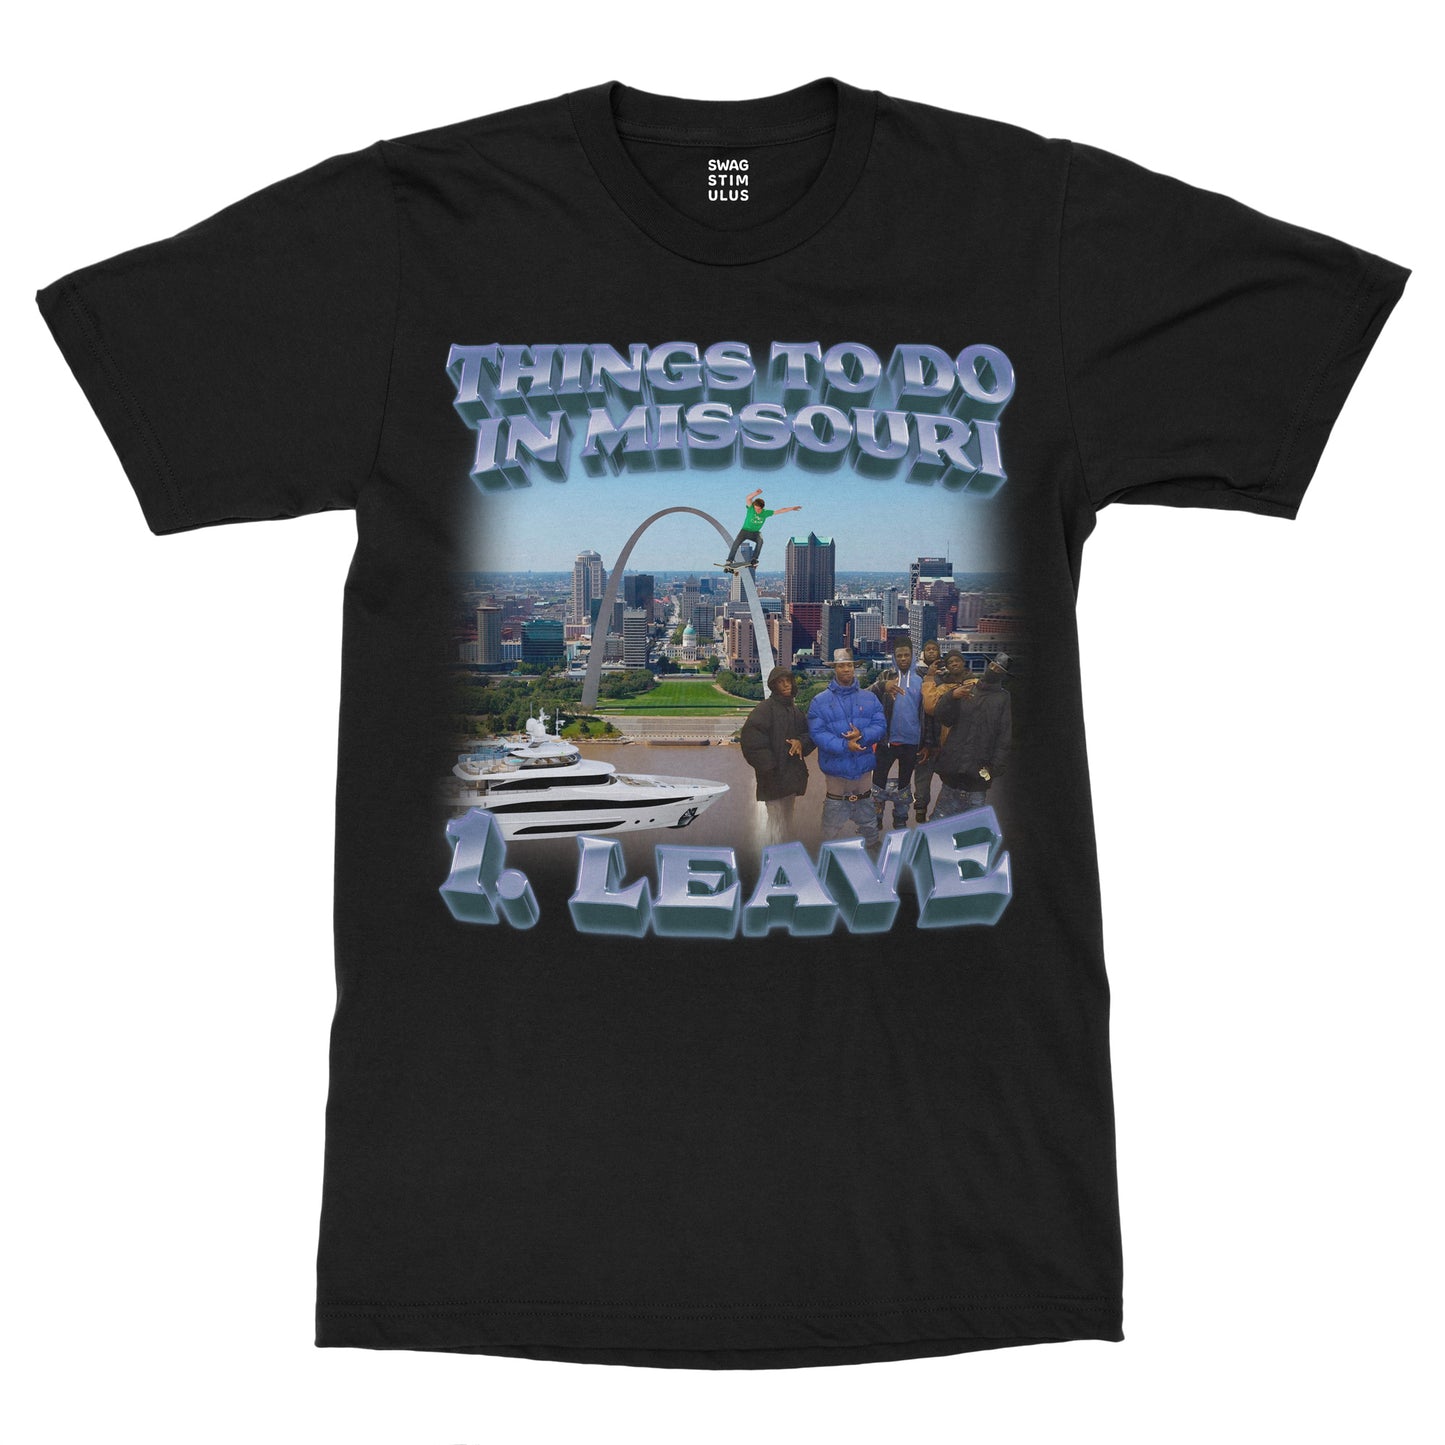 Things To Do in Missouri T-Shirt